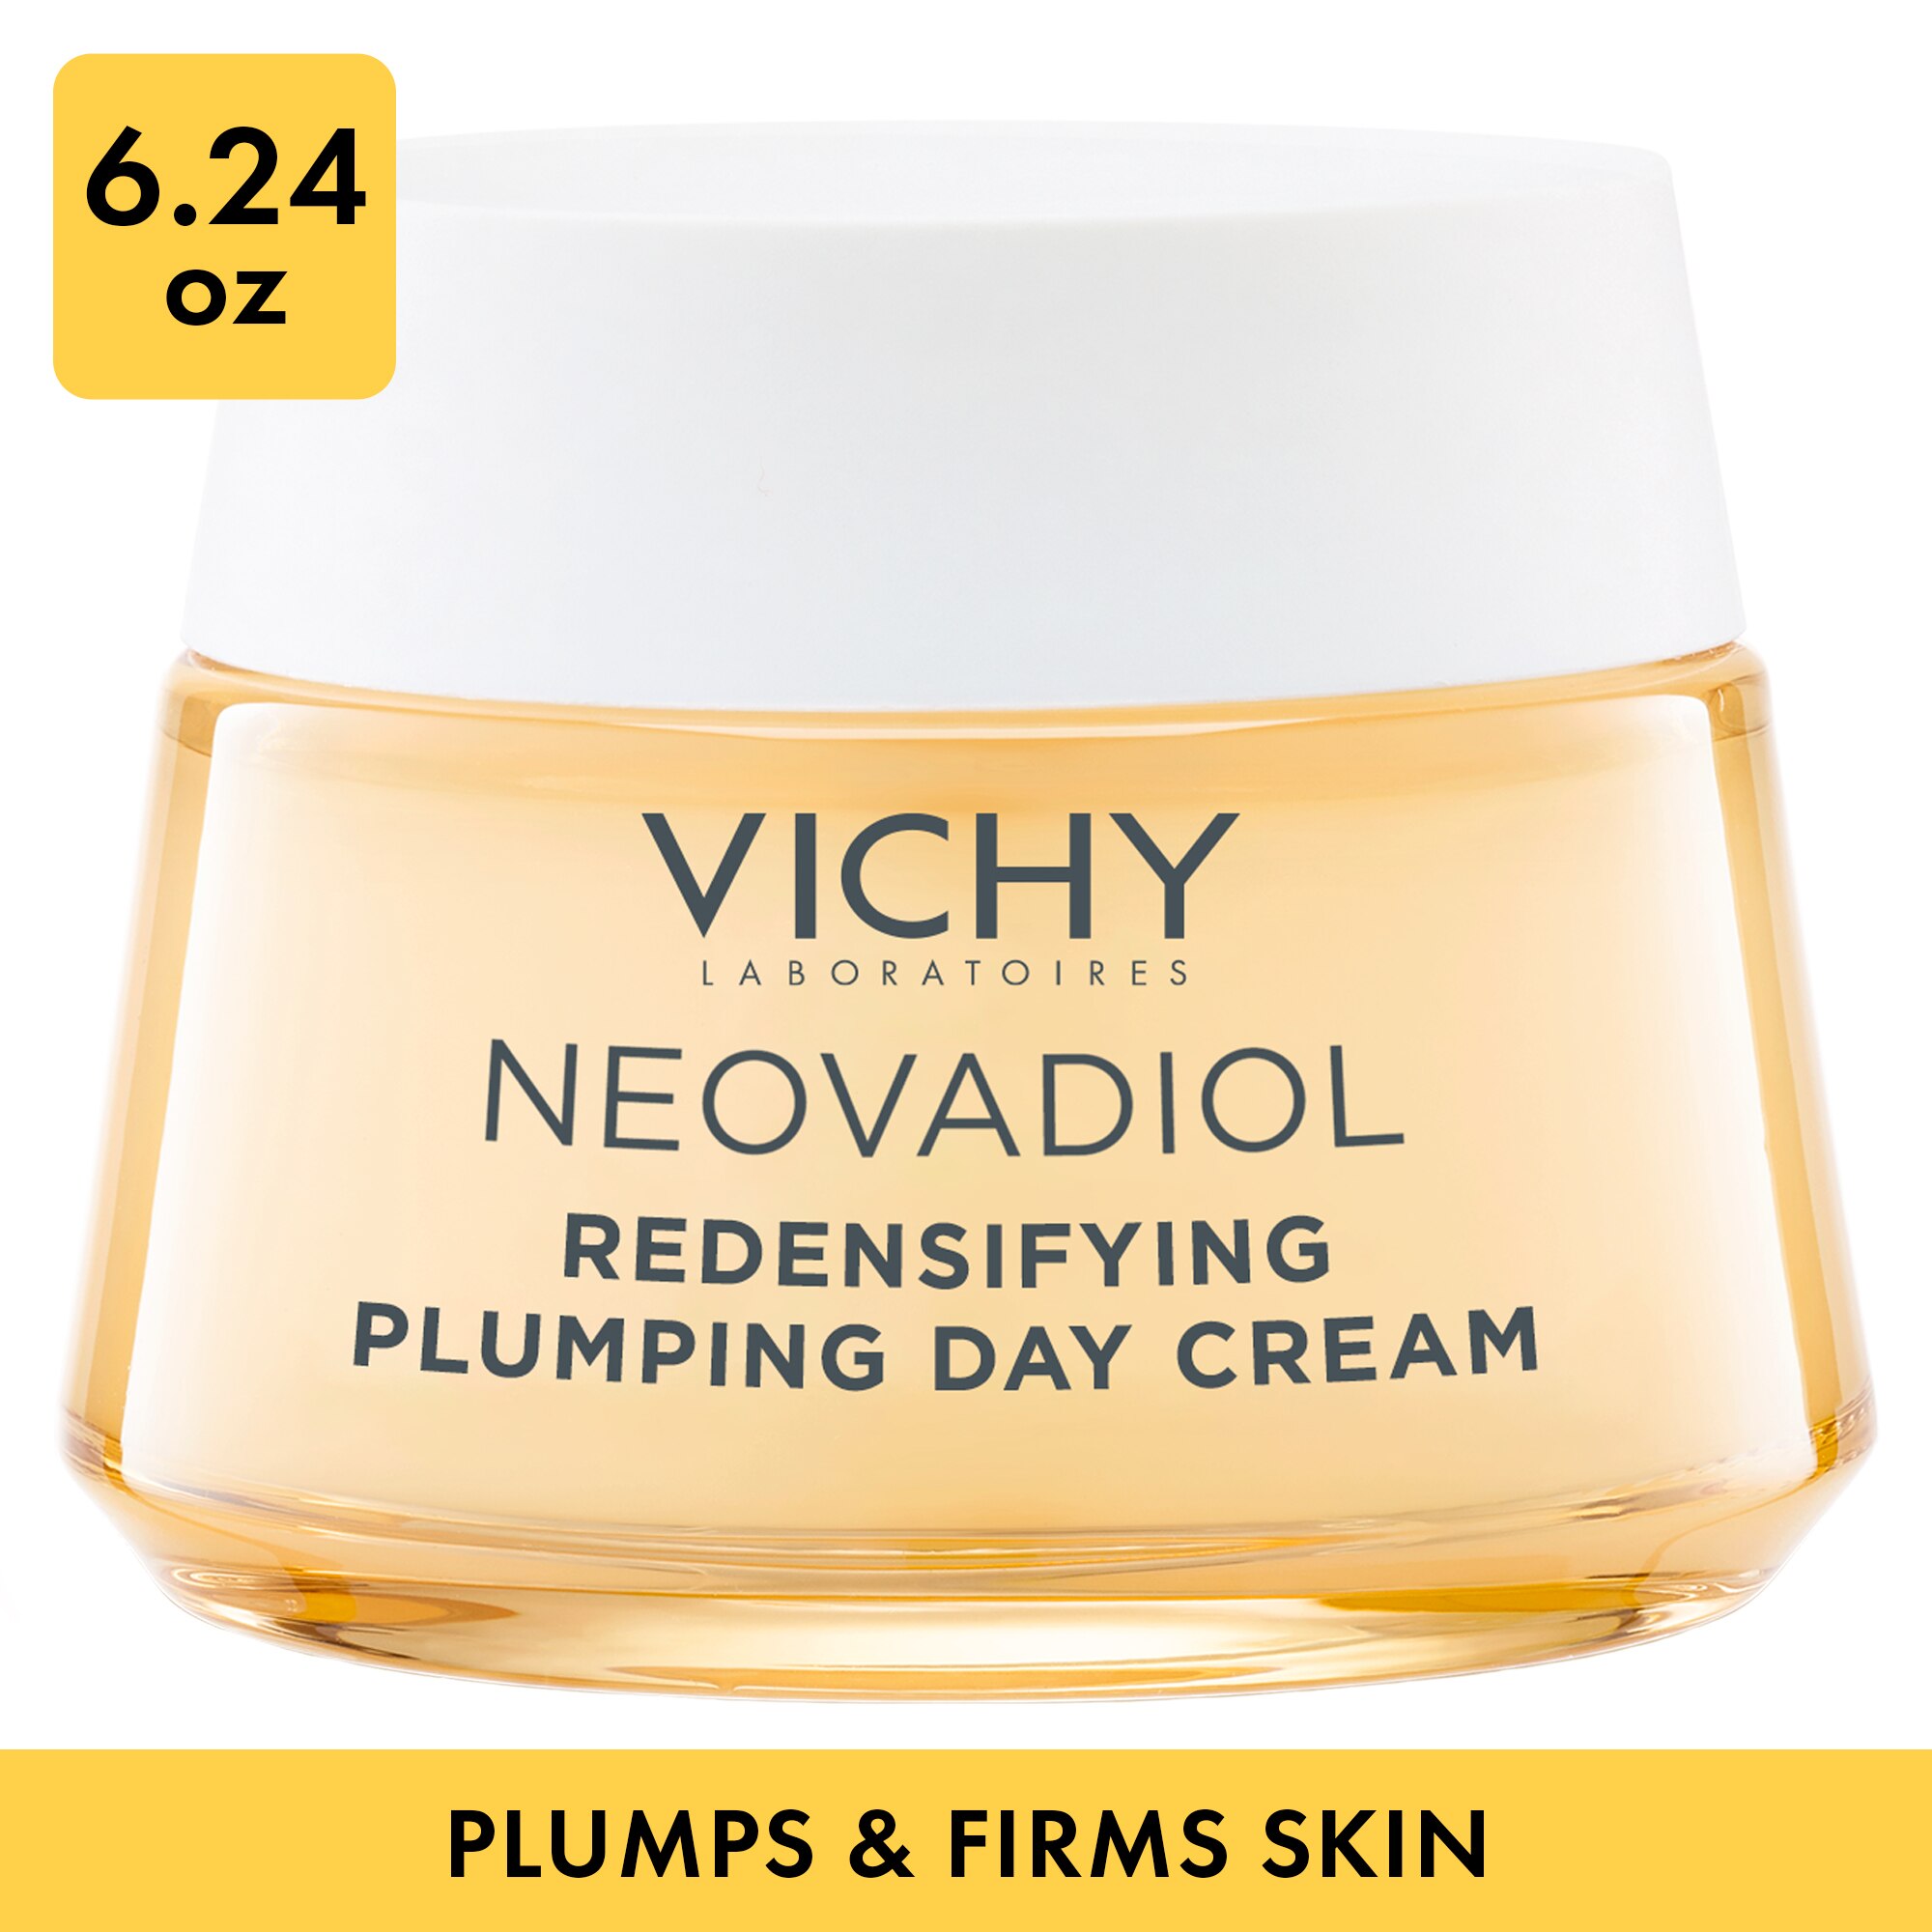 Vichy Neovadiol Peri-Menopause Plumping Day Cream with Hyaluronic Acid, 1.6 oz